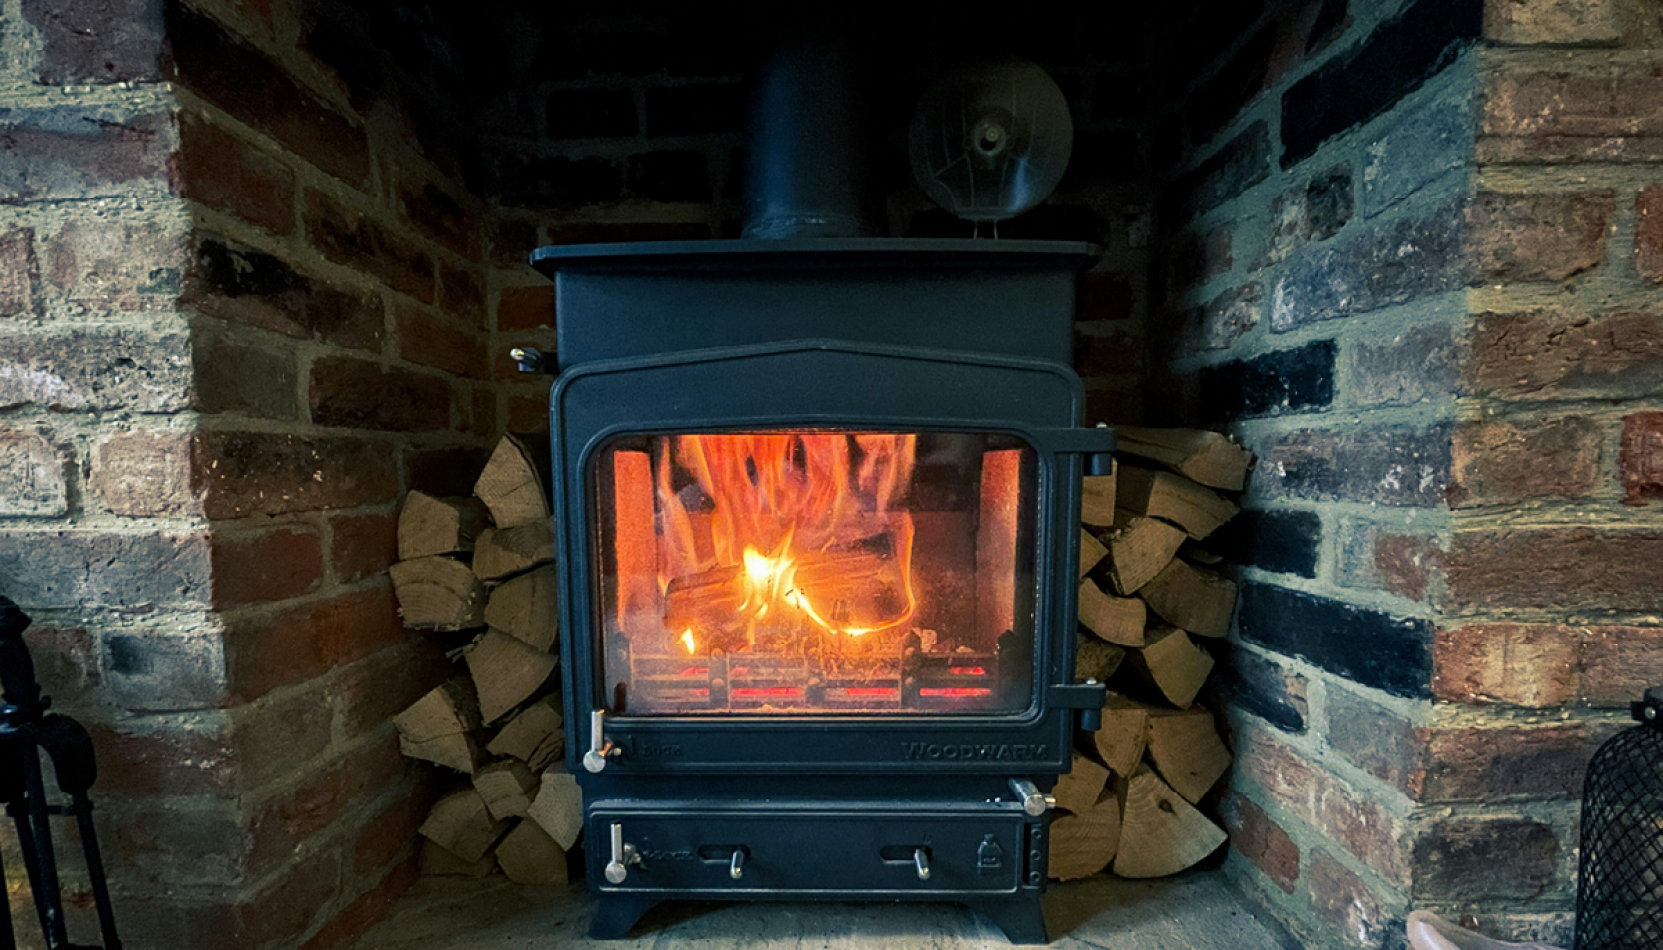 log burner, conservatory, conservatory heating, best ways to warm your conservatory, interiors, home and garden, house and garden, move to surrey, moving to surrey, lifestyle, living, visit surrey, Surrey living, guide to surrey